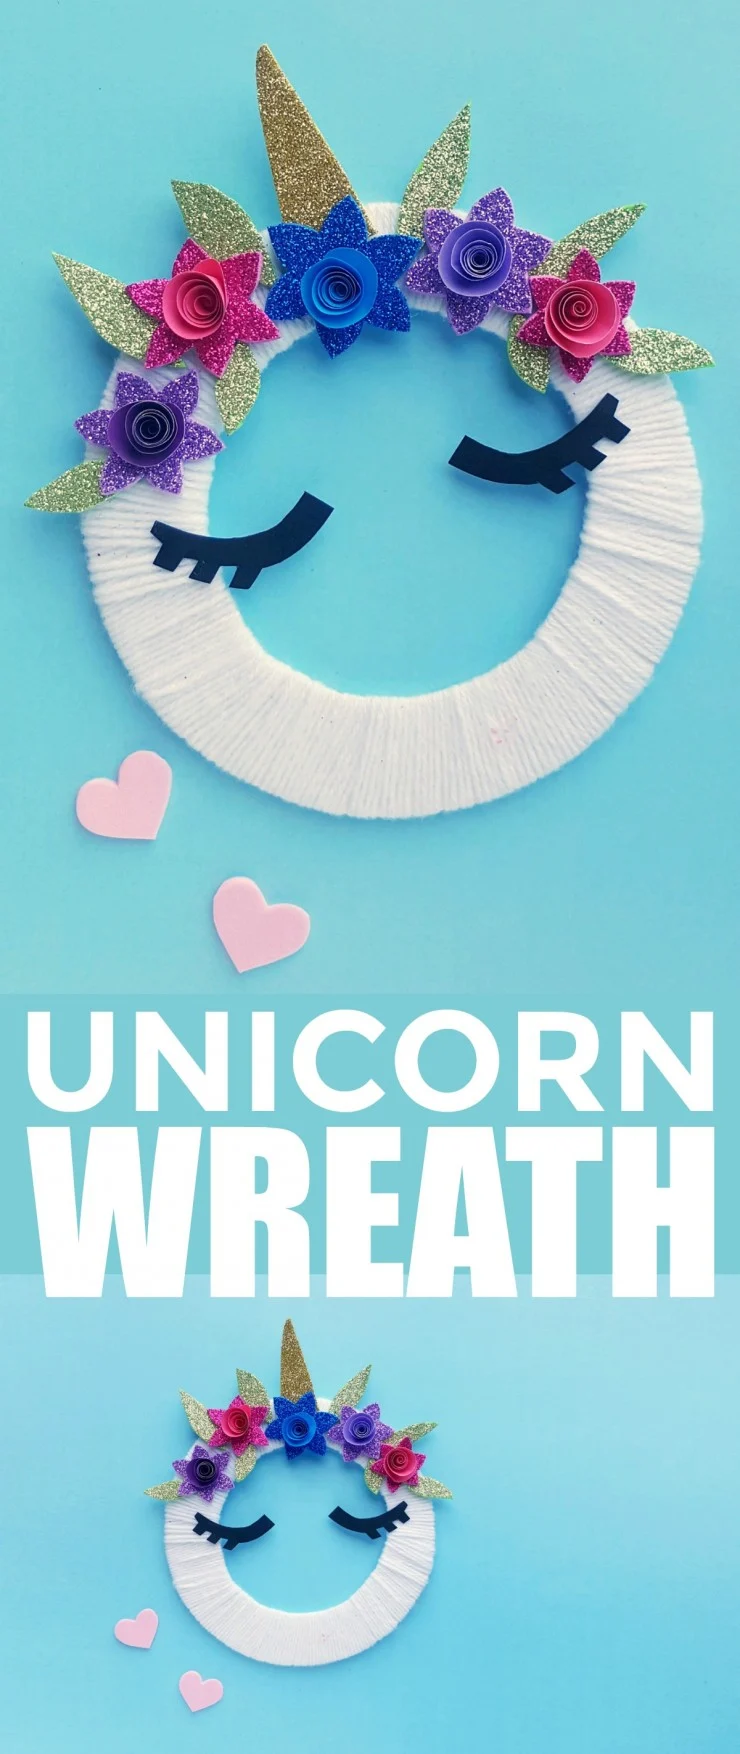 This adorable Unicorn Theme Craft for Kids is sure to be a hit - who doesn't love Unicorns? Little hands will love making their very own unicorn wreath!